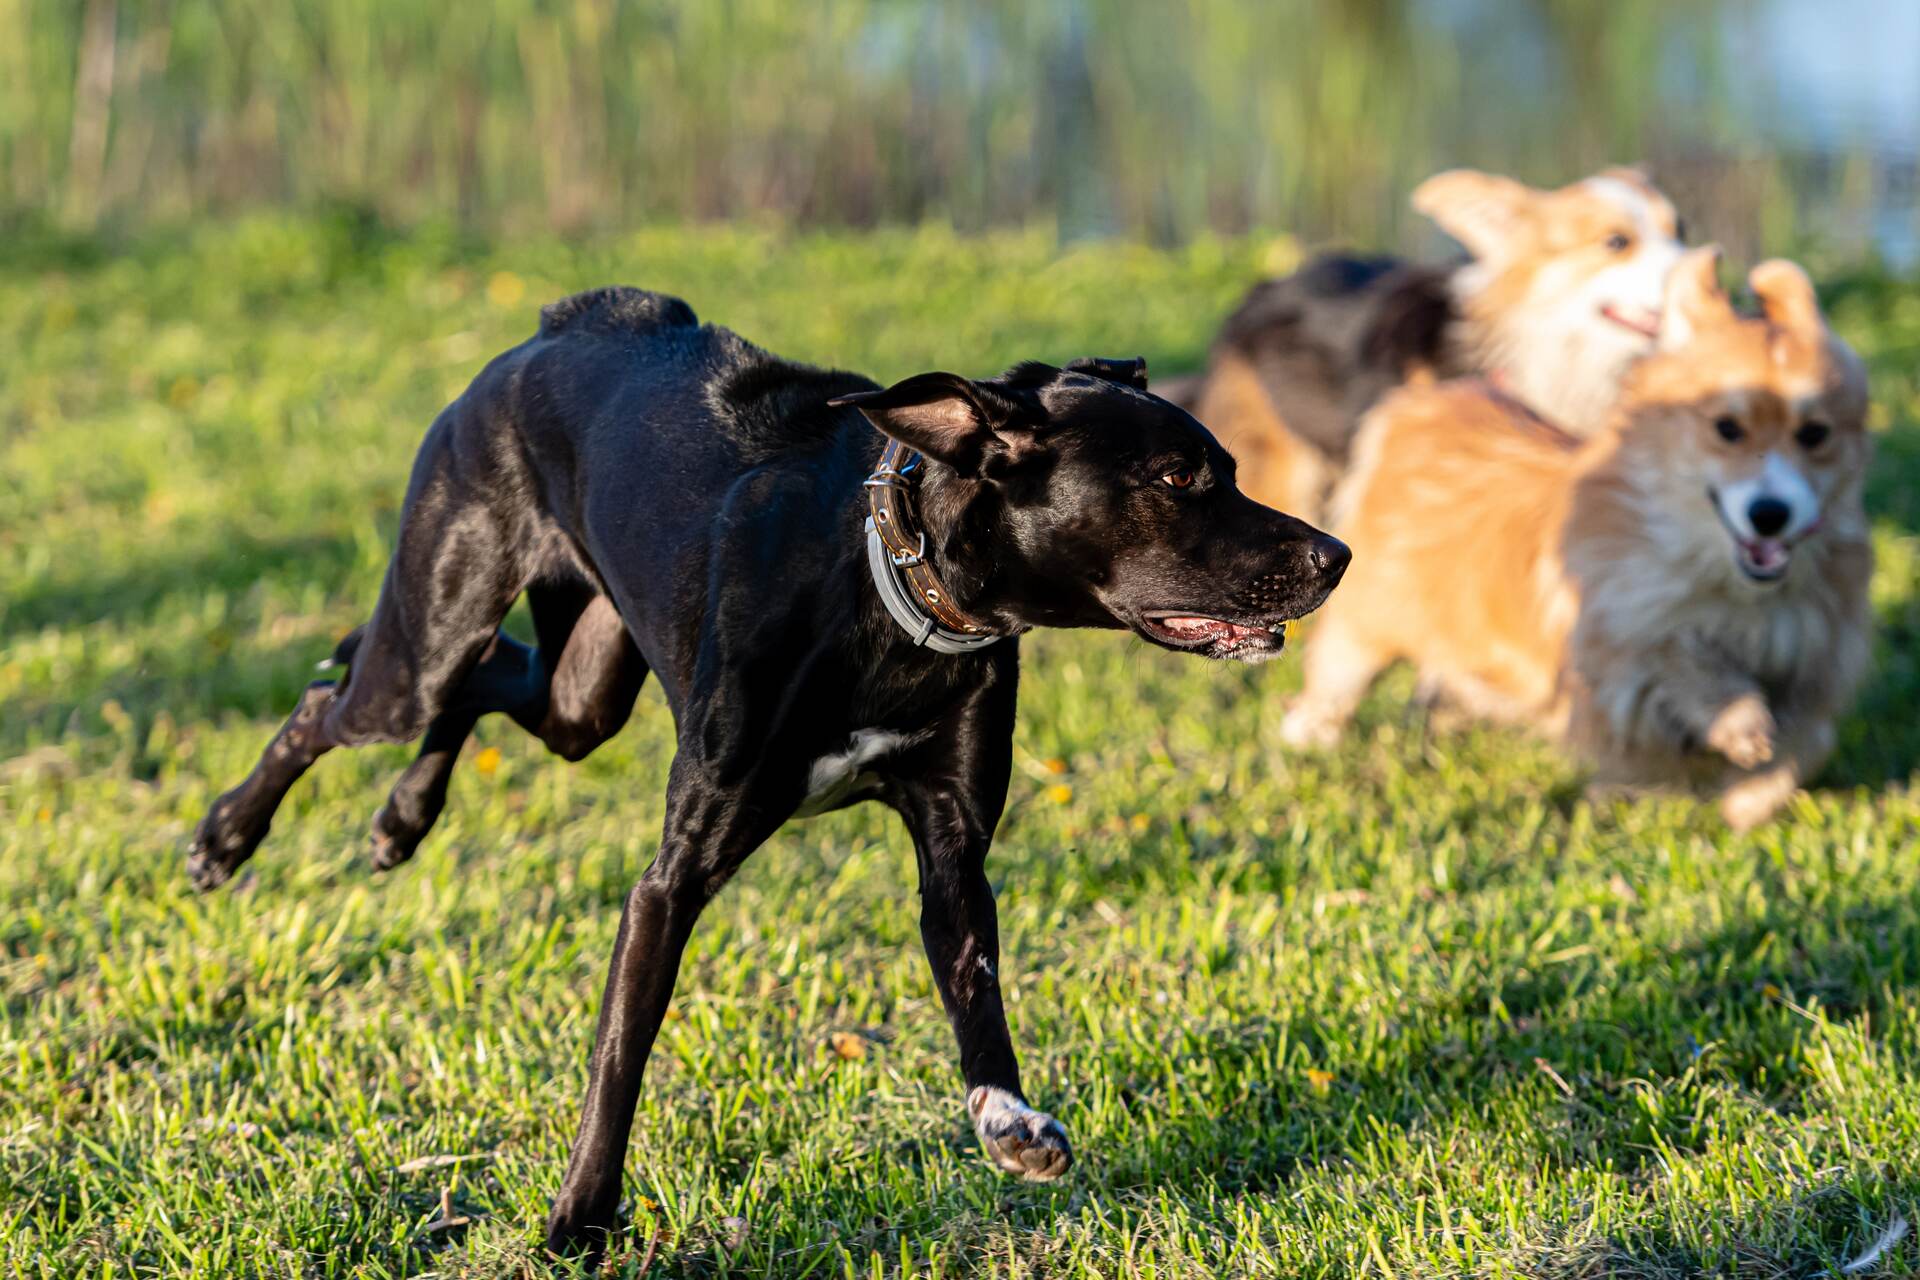 A pack of dogs running in a garden